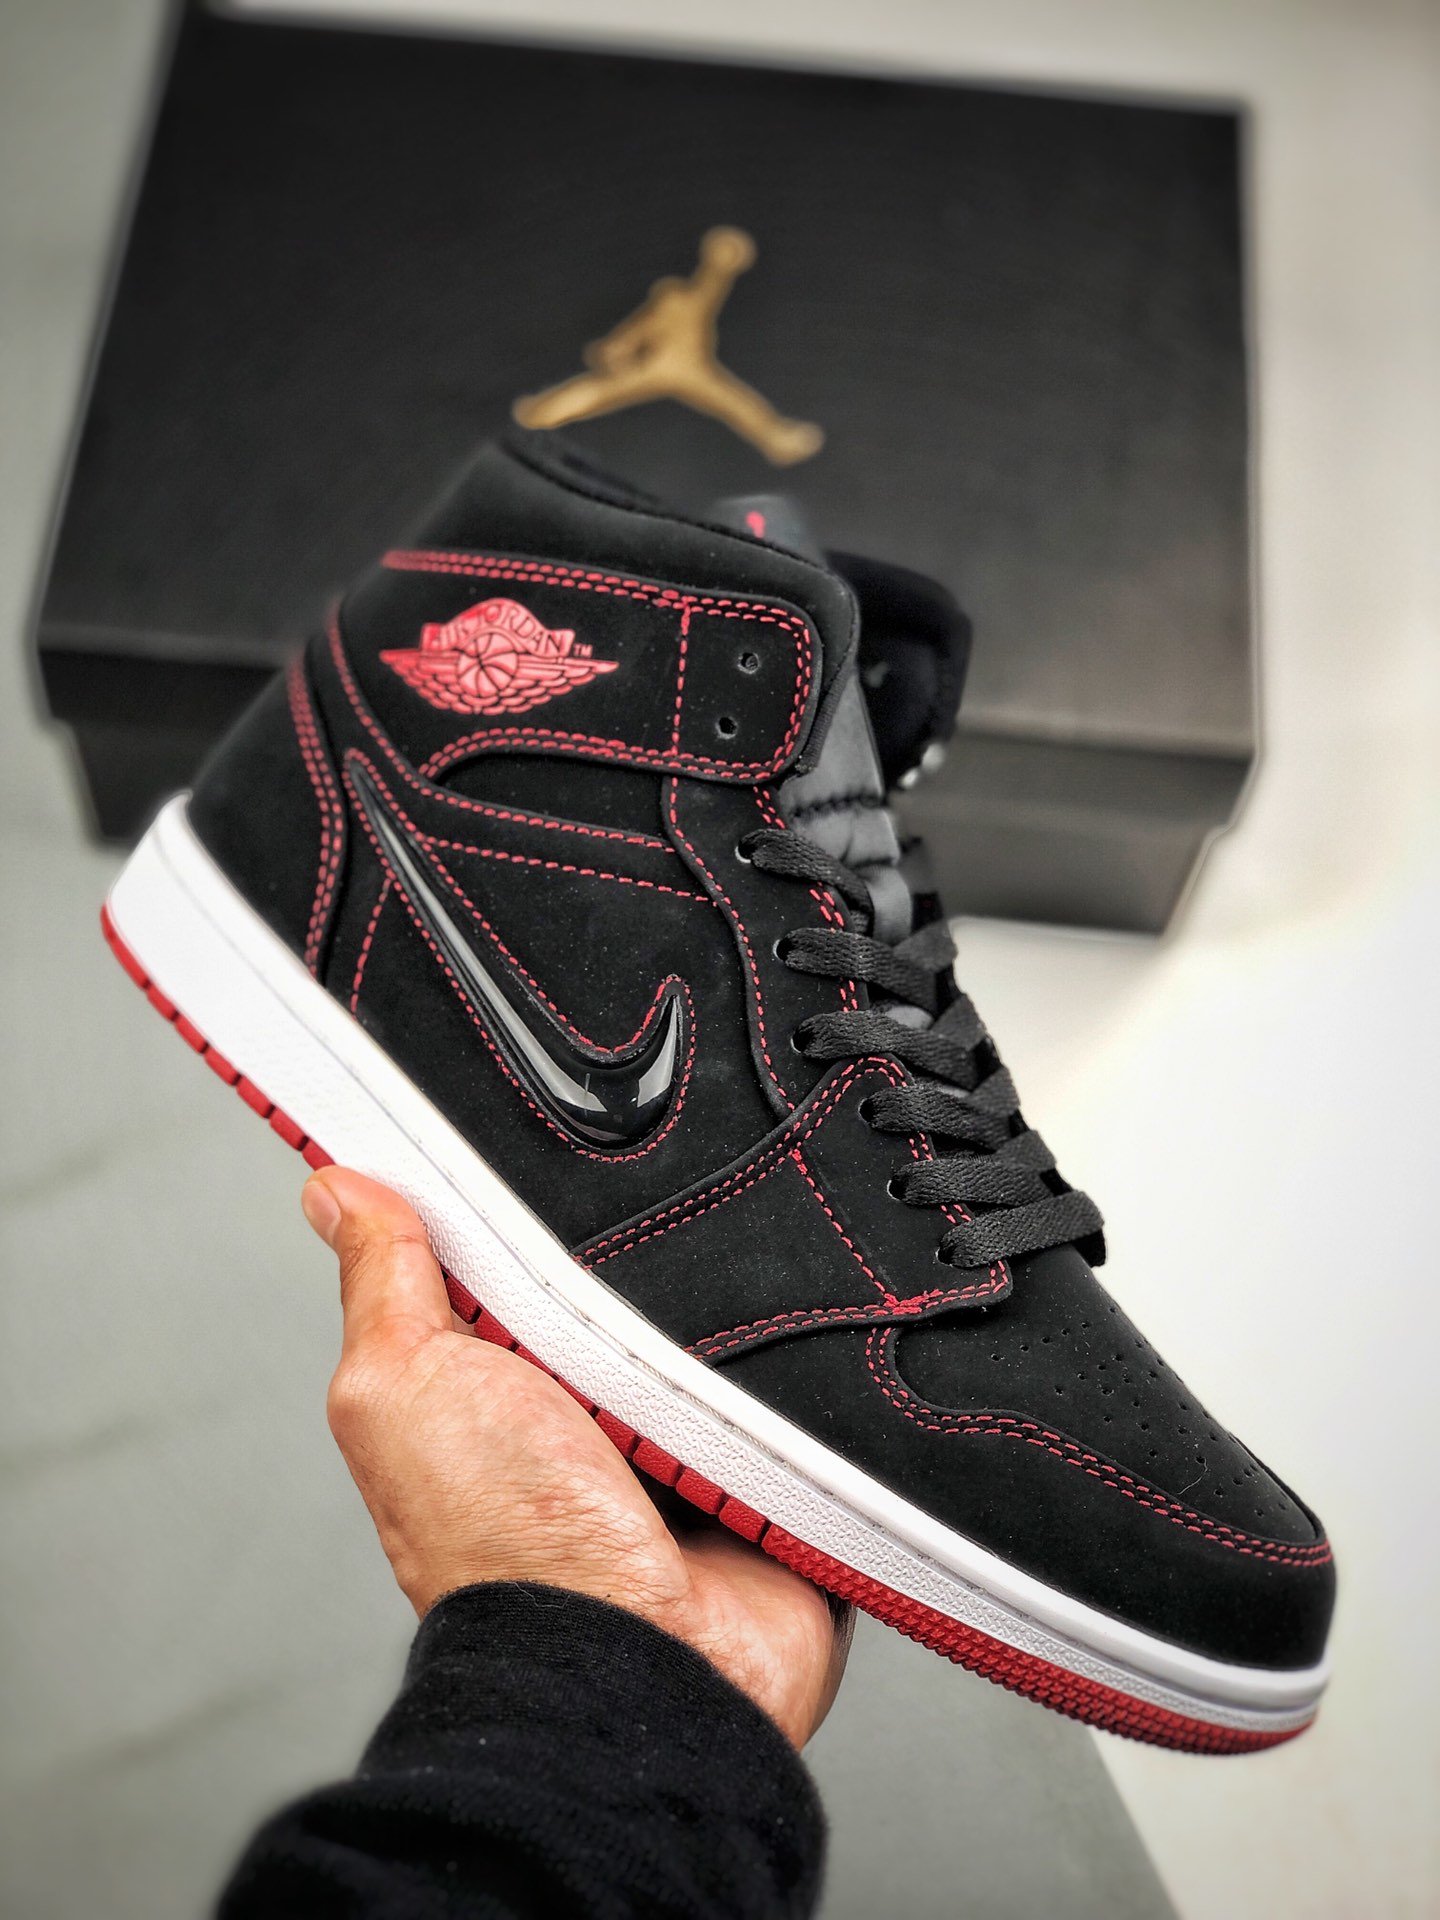 come fly with me jordan 1